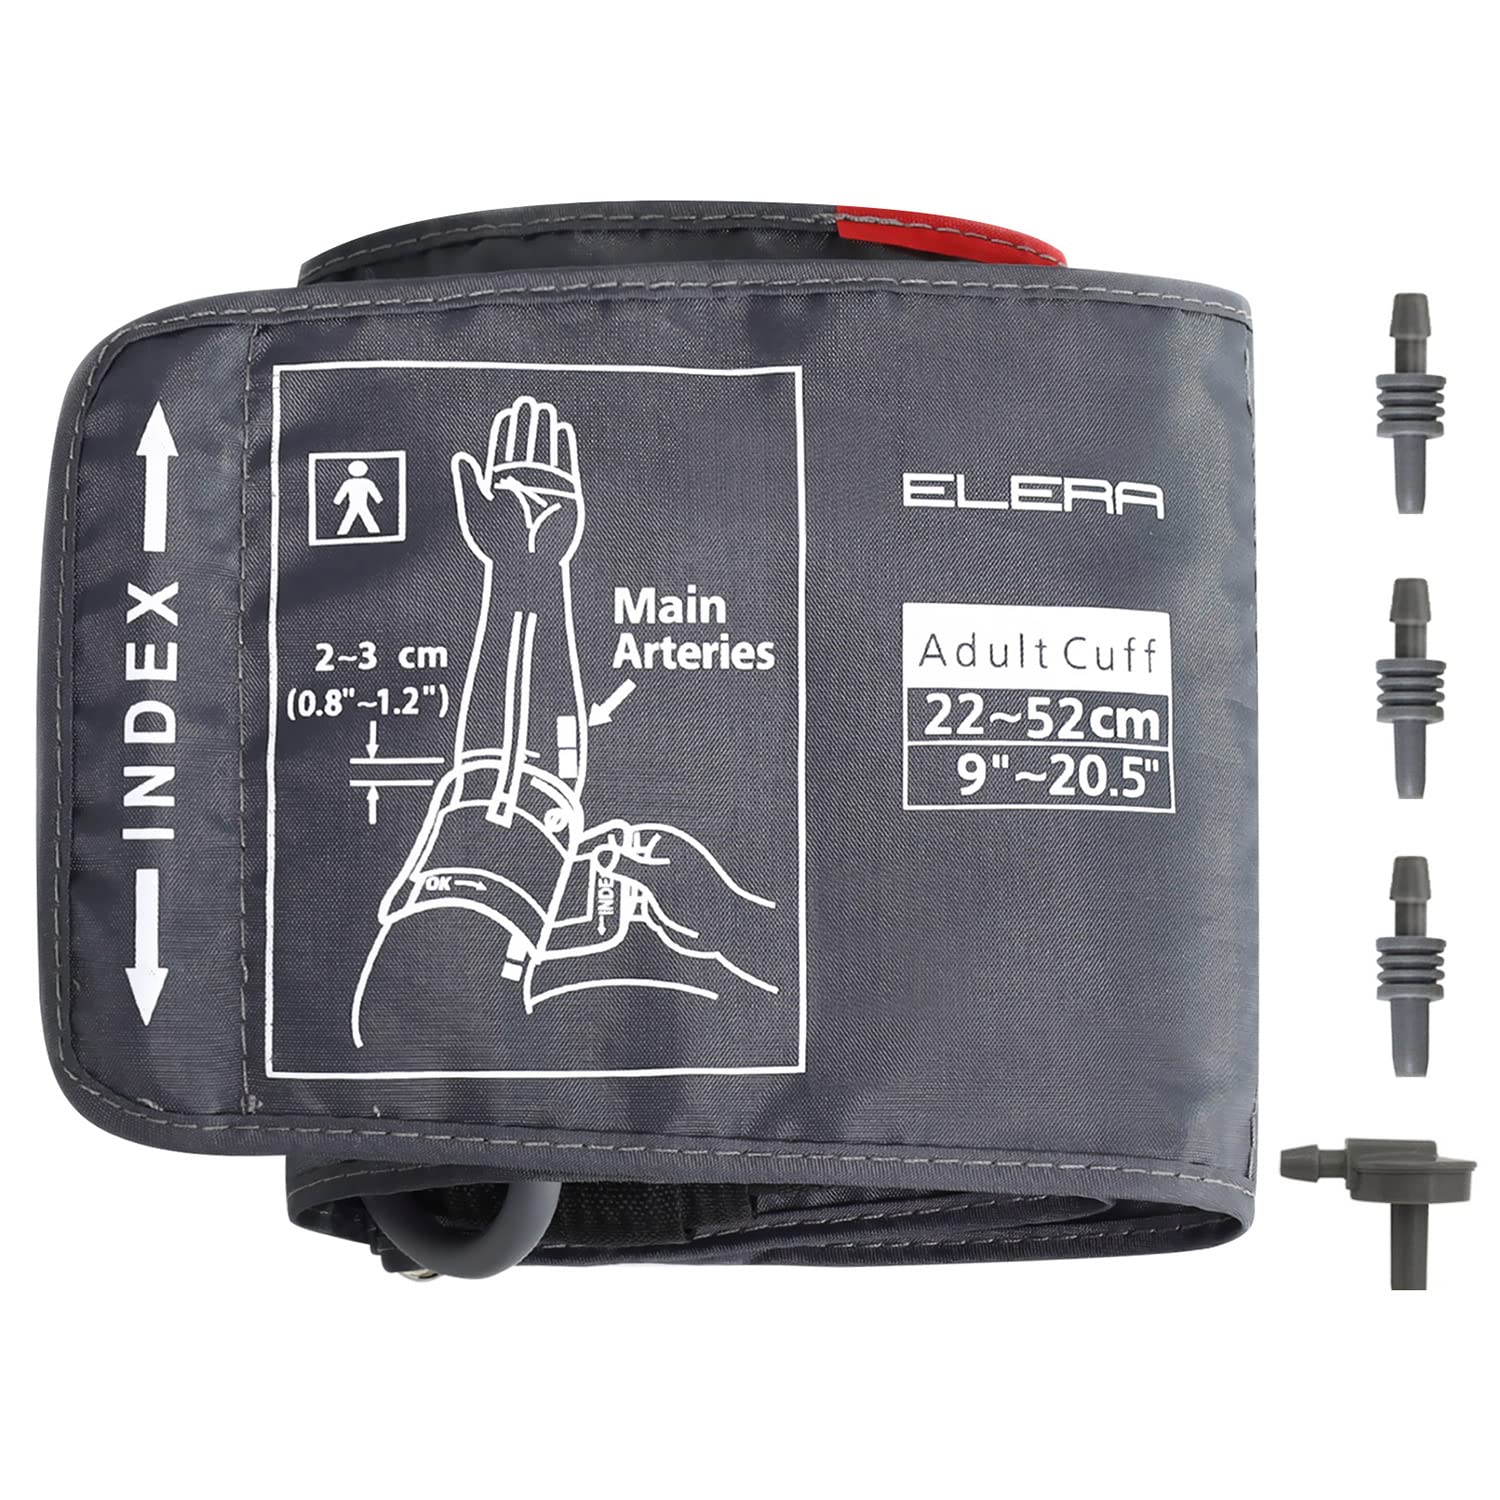 Extra Large Blood Pressure Cuff, ELERA Replacement Extra Large Cuff  Applicable for 9”-20.5” Inches (22-52CM) Big Arm, Cuff Only BP Machine Not